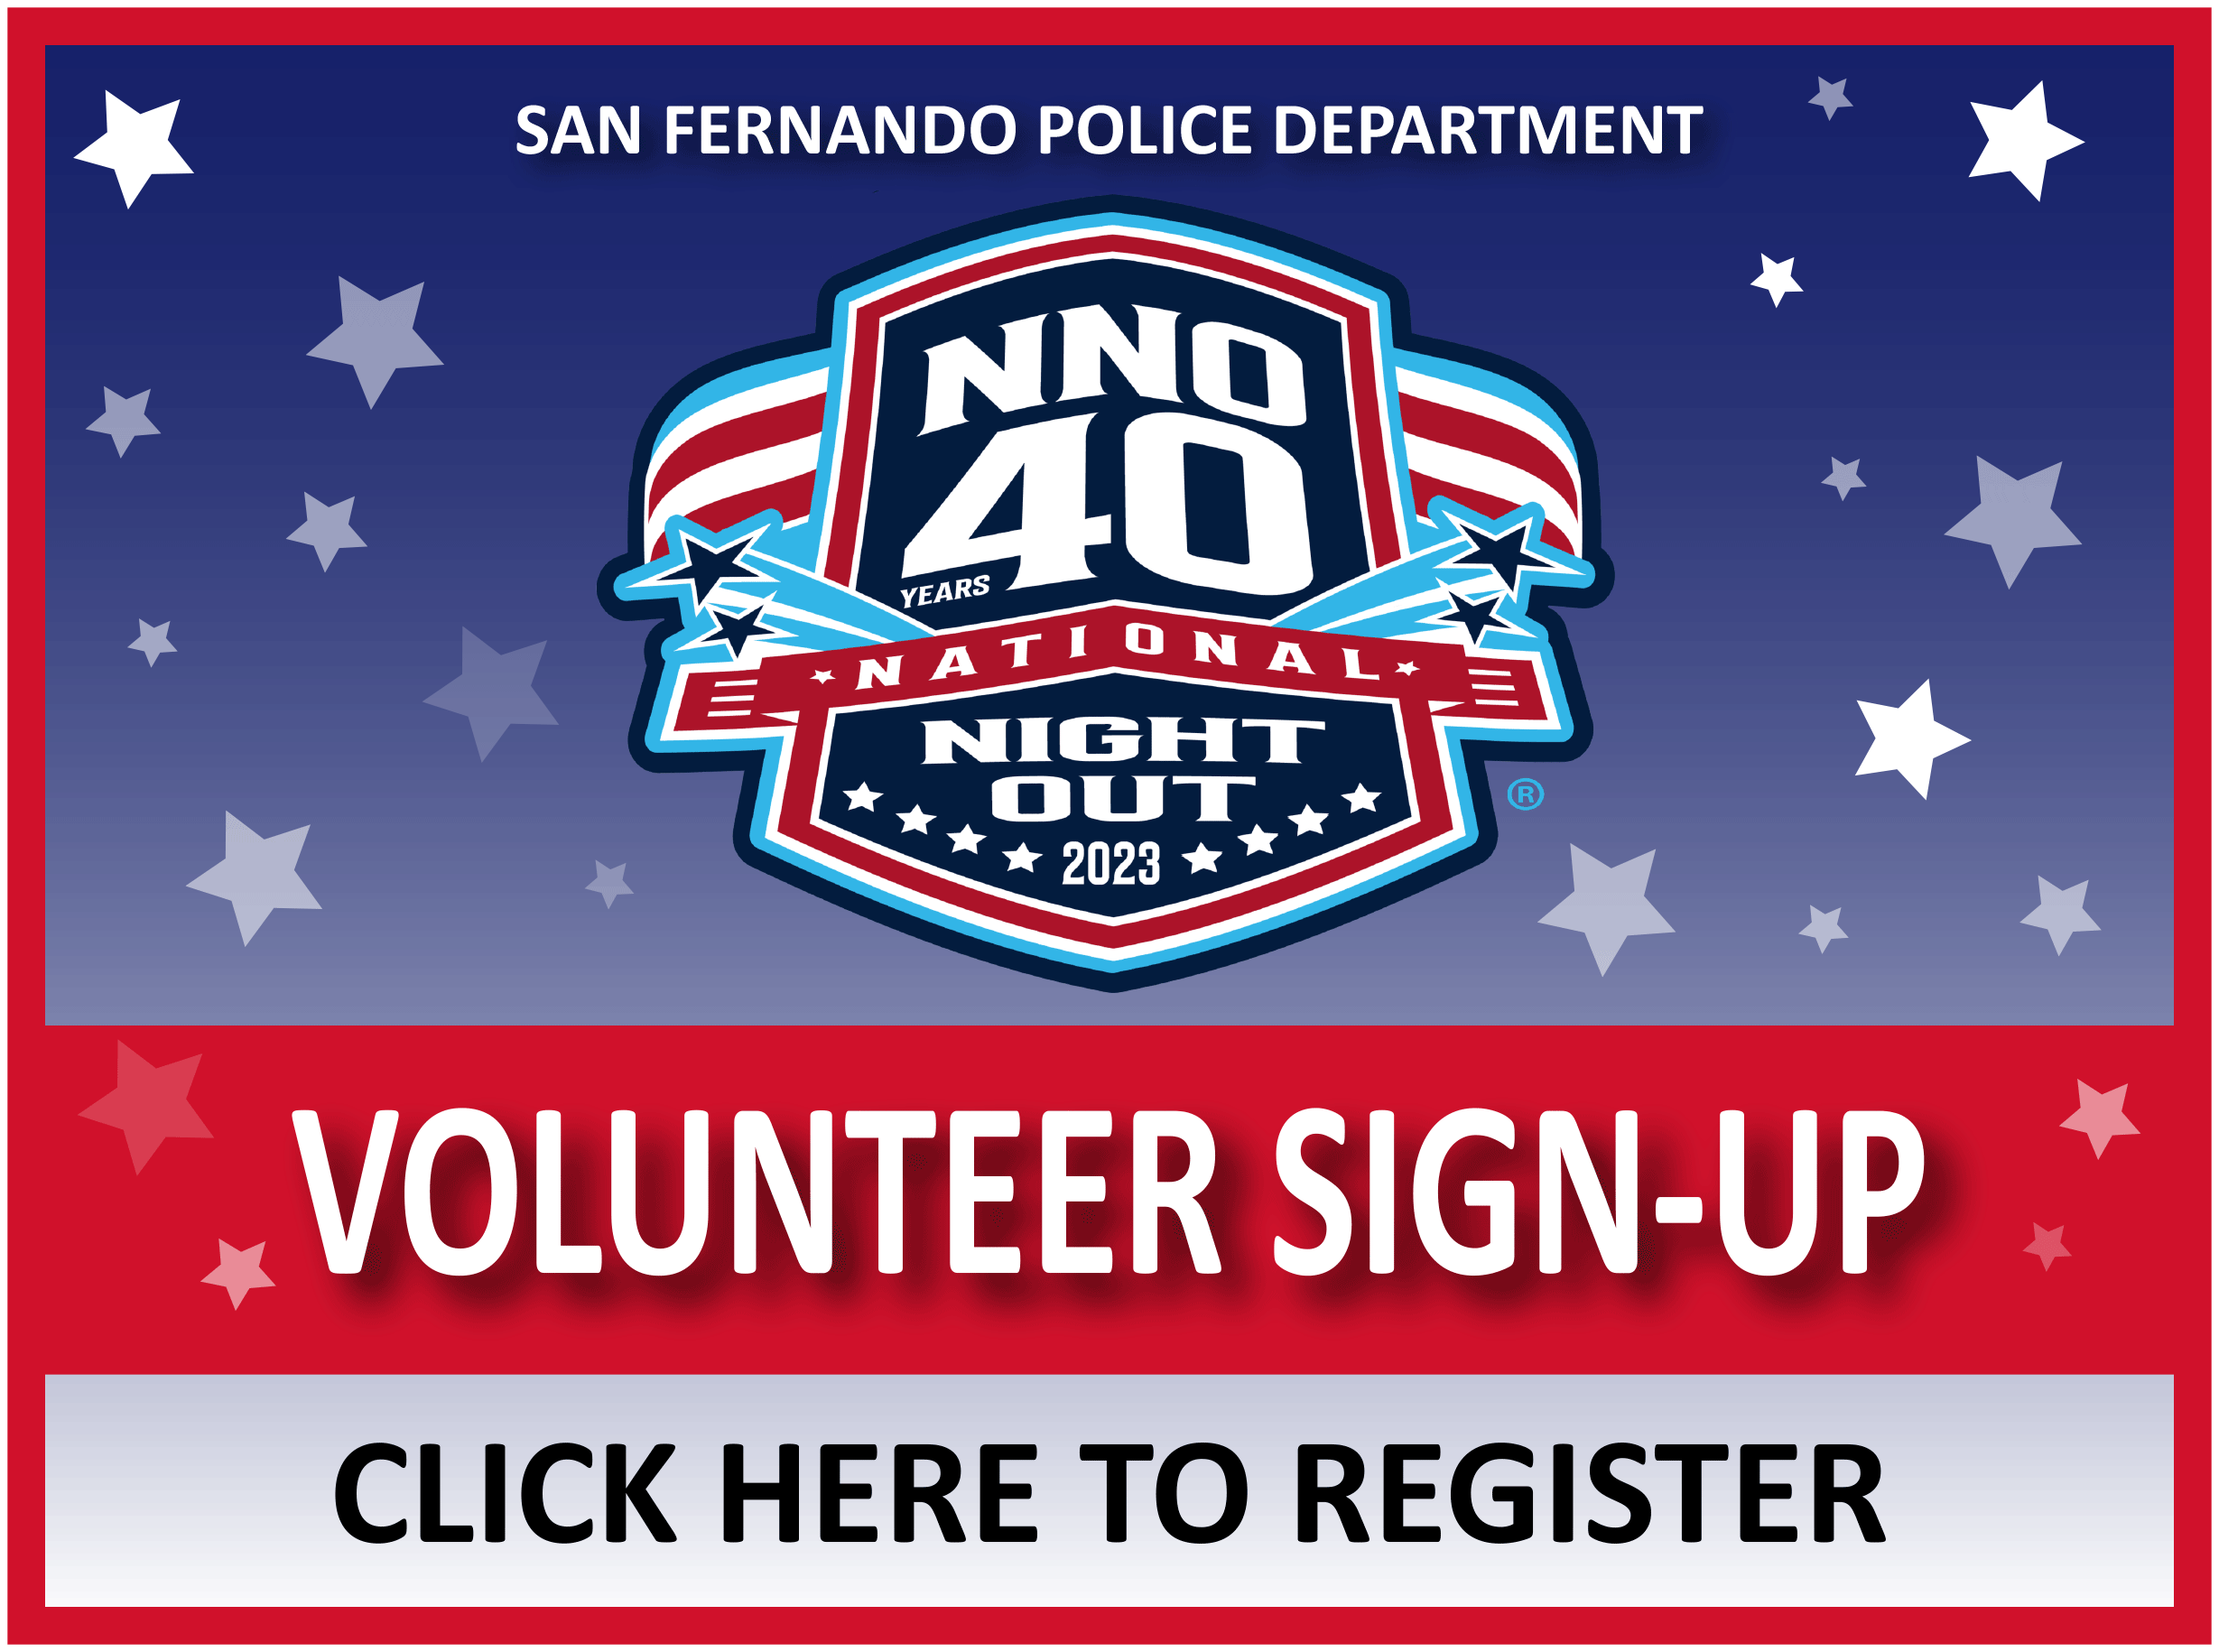 National-Night-Out-(2023)-VOLUNTEER-SIGN-UP-CLICK-HERE